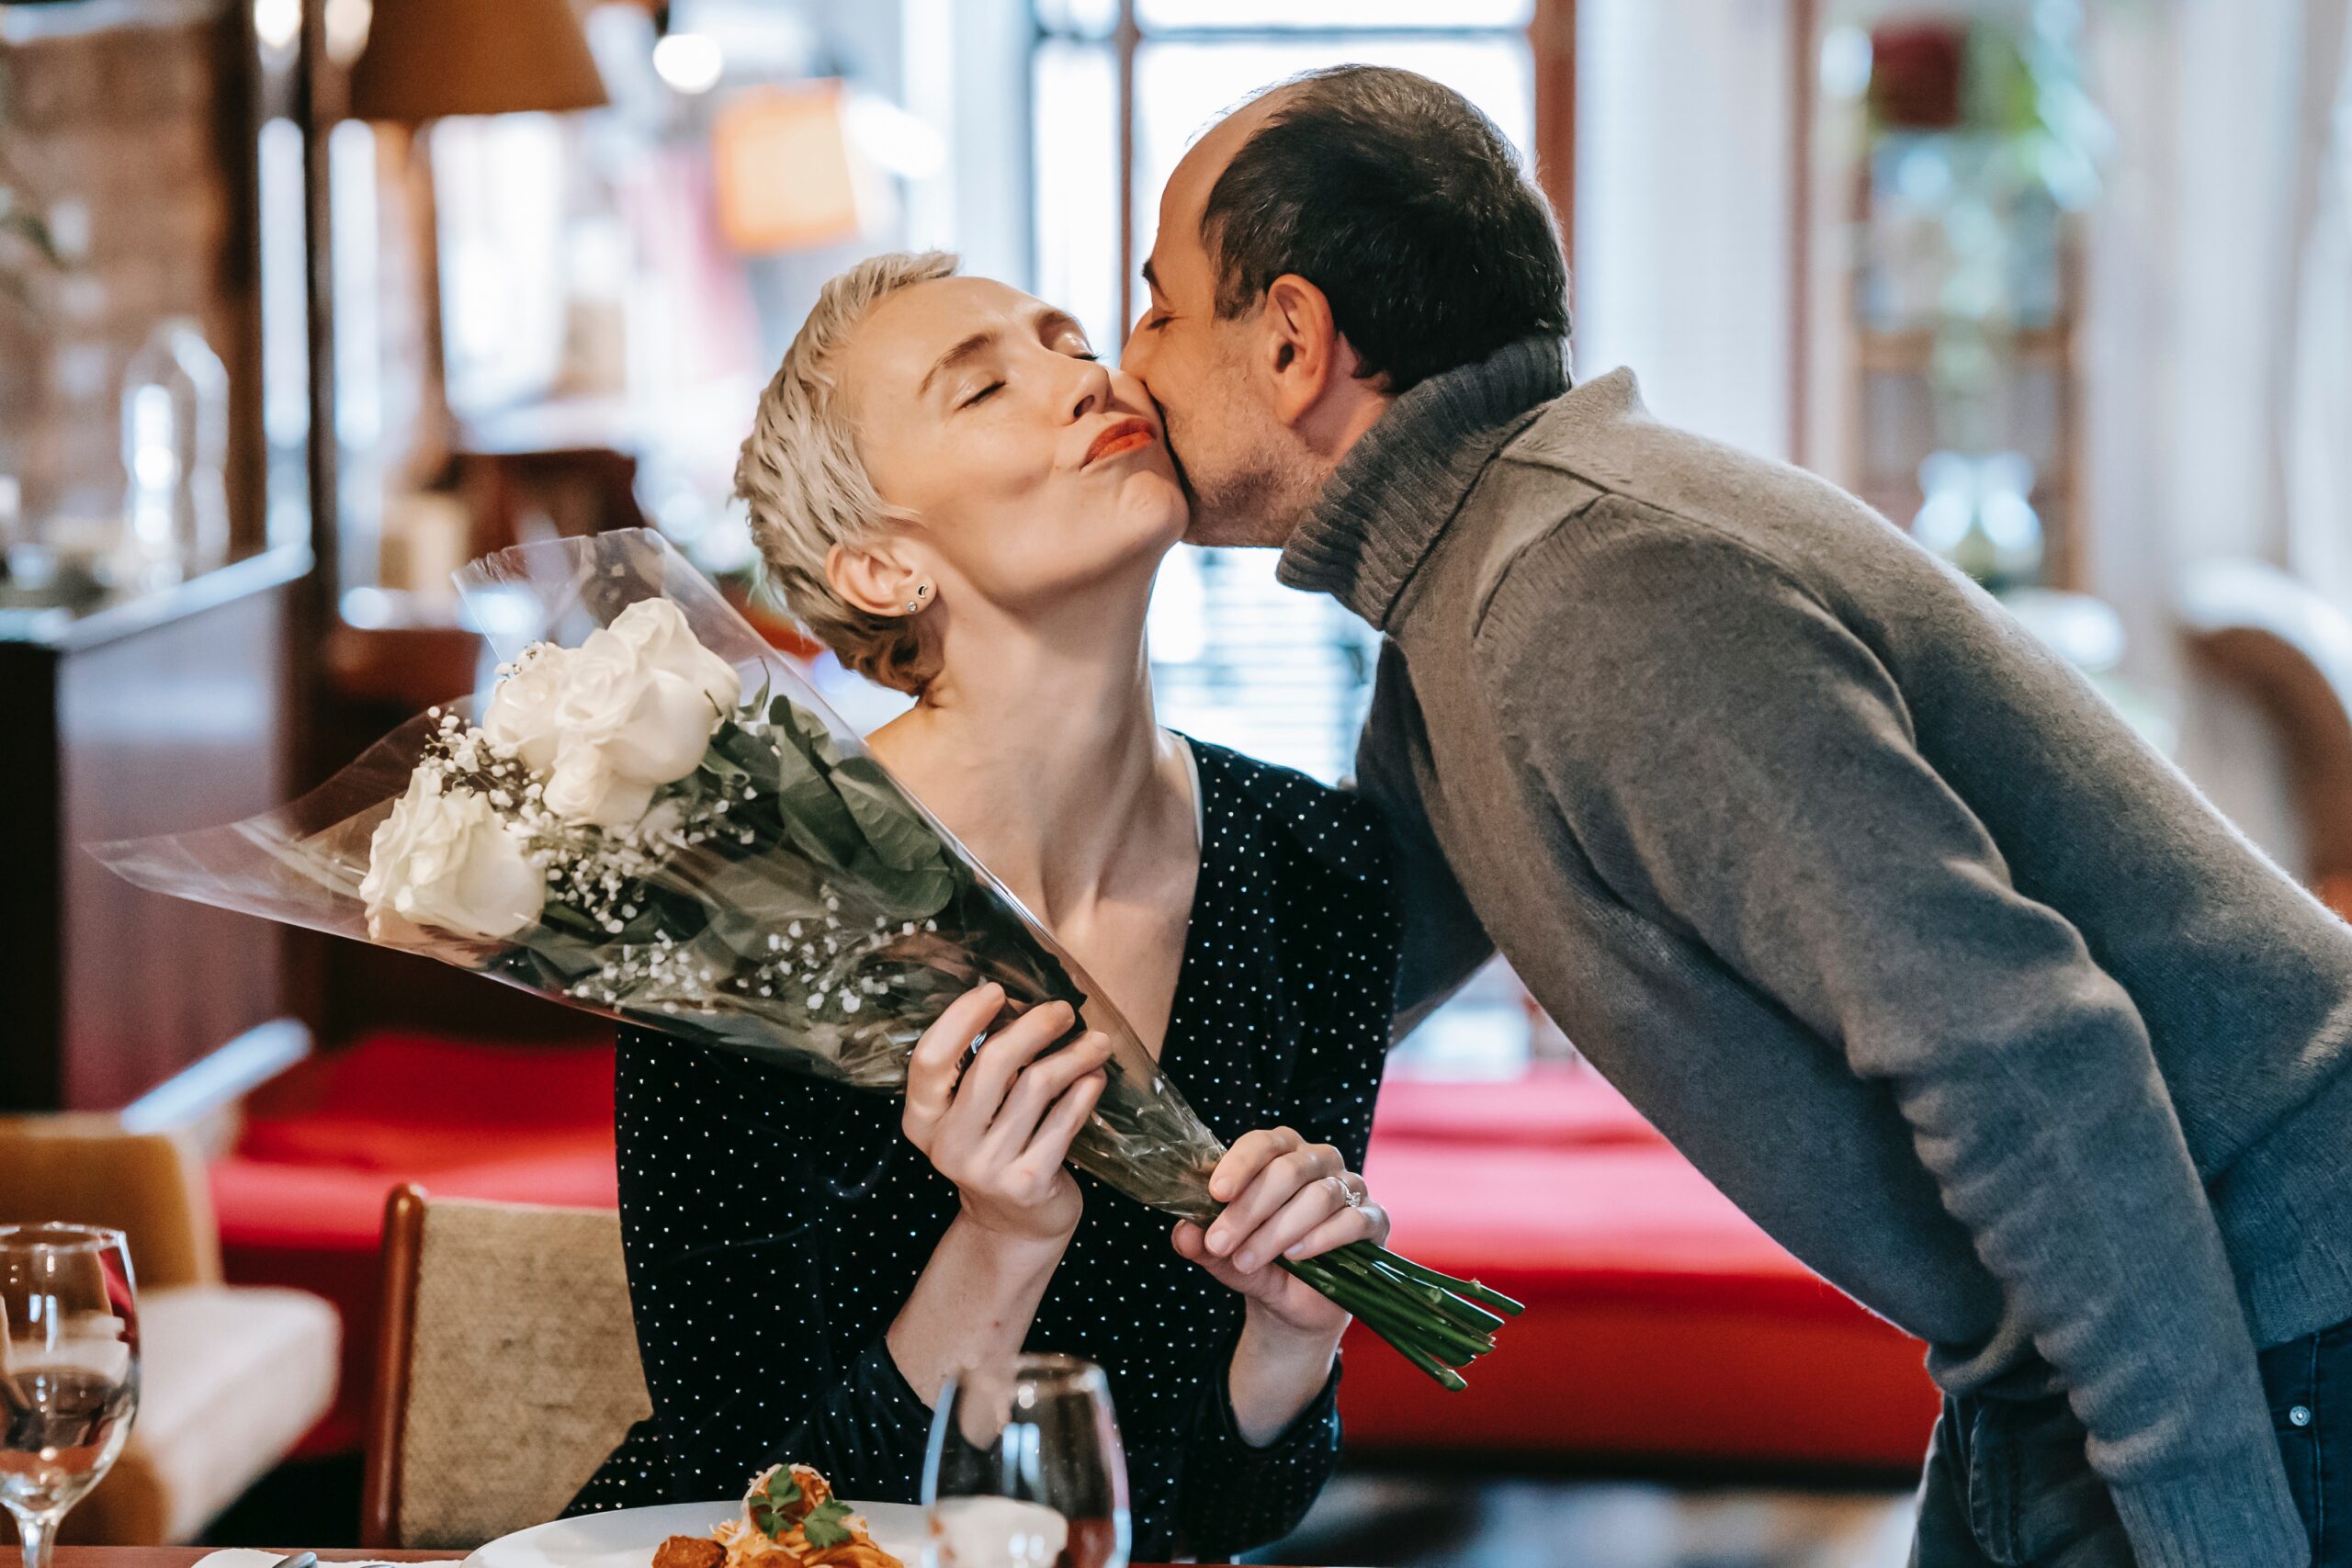 man kissing a woman holding flowers in a restaurant